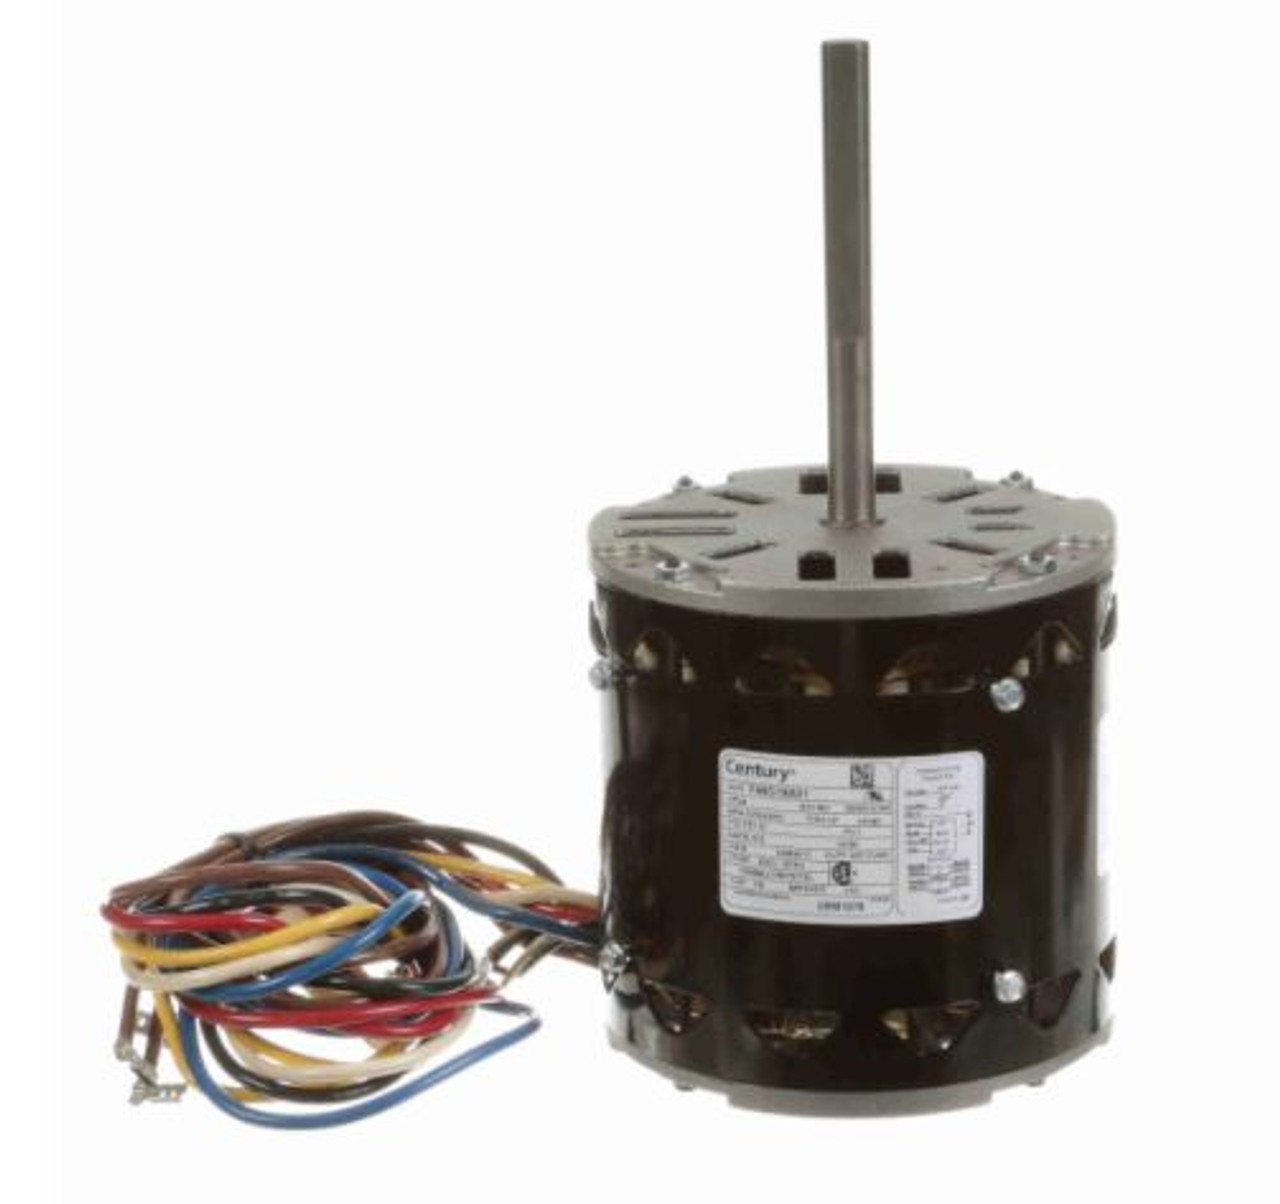 ORM1076 OEM Direct Replacement Motor